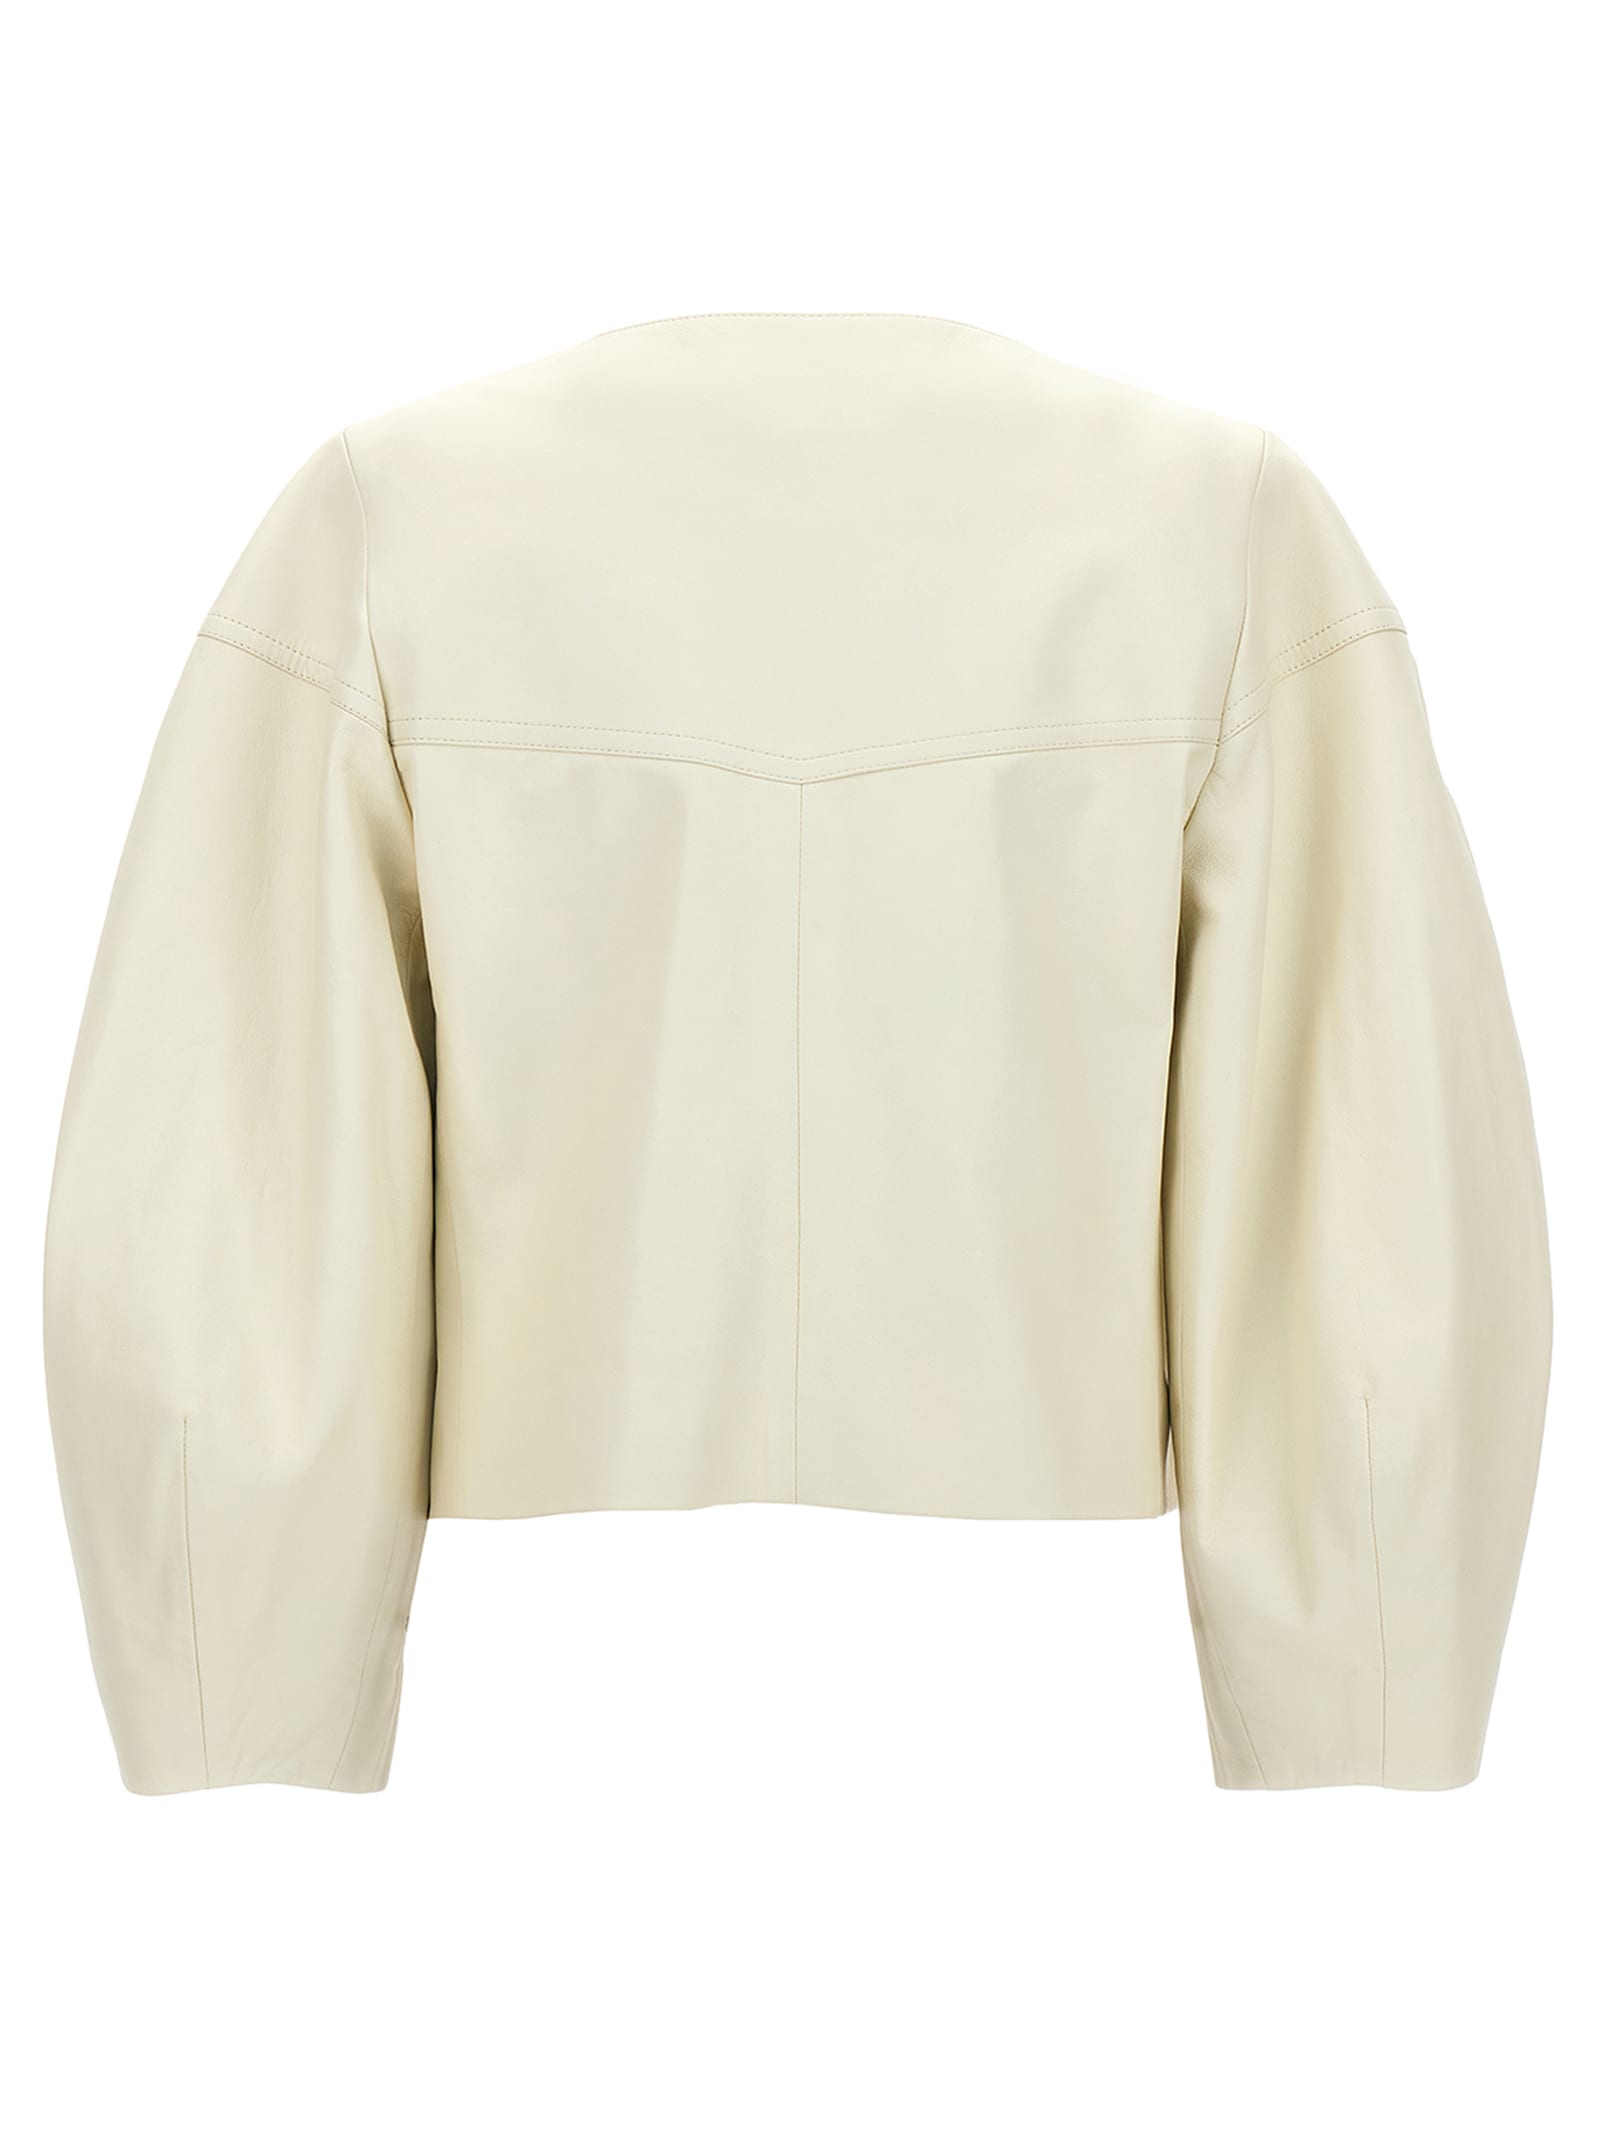 Shop Chloé Studded Leather Jacket In White